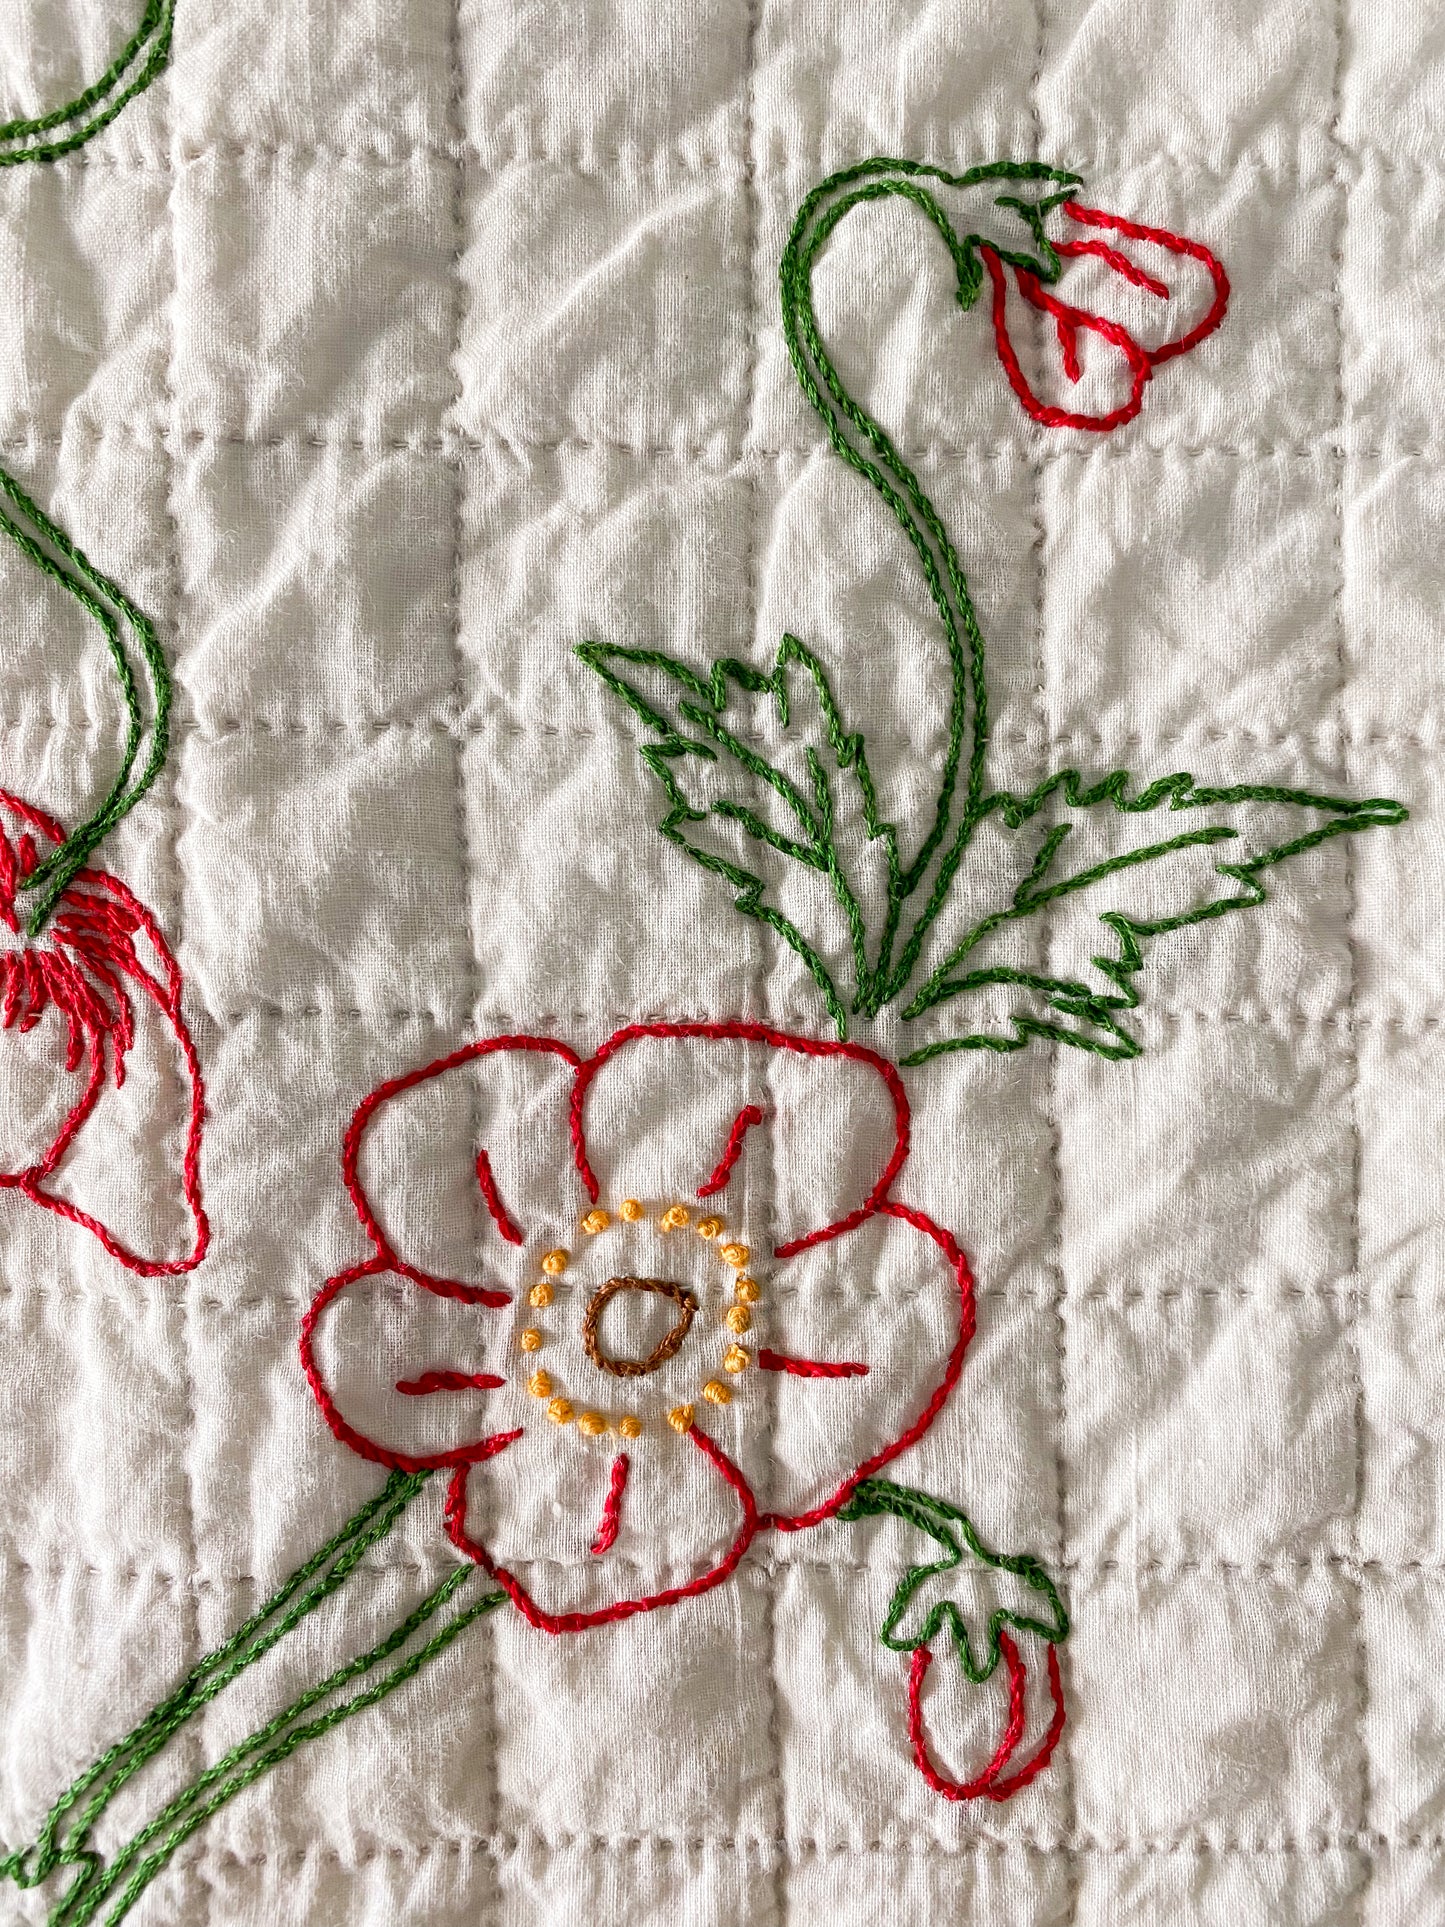 Vintage Yellow and White Quilt with Red Embroidered Flowers